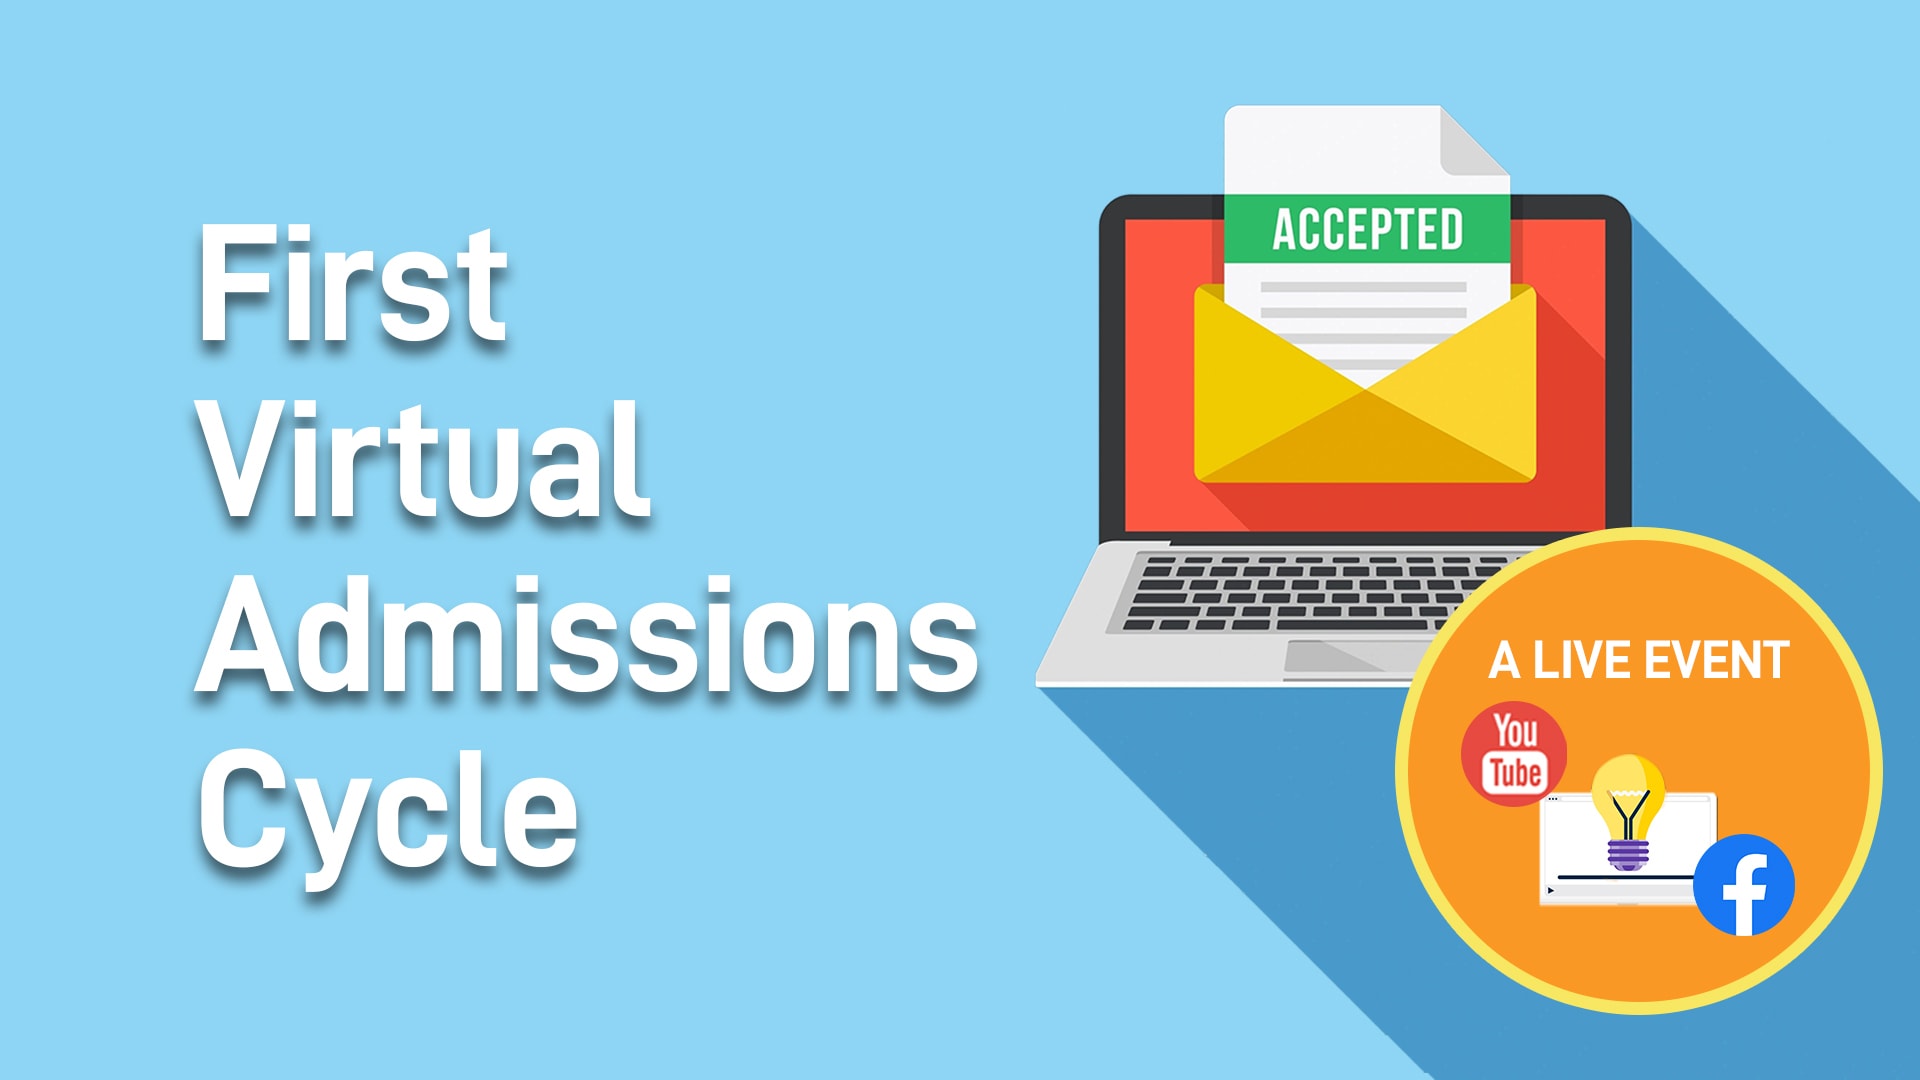 The First Virtual Admissions Cycle graphic